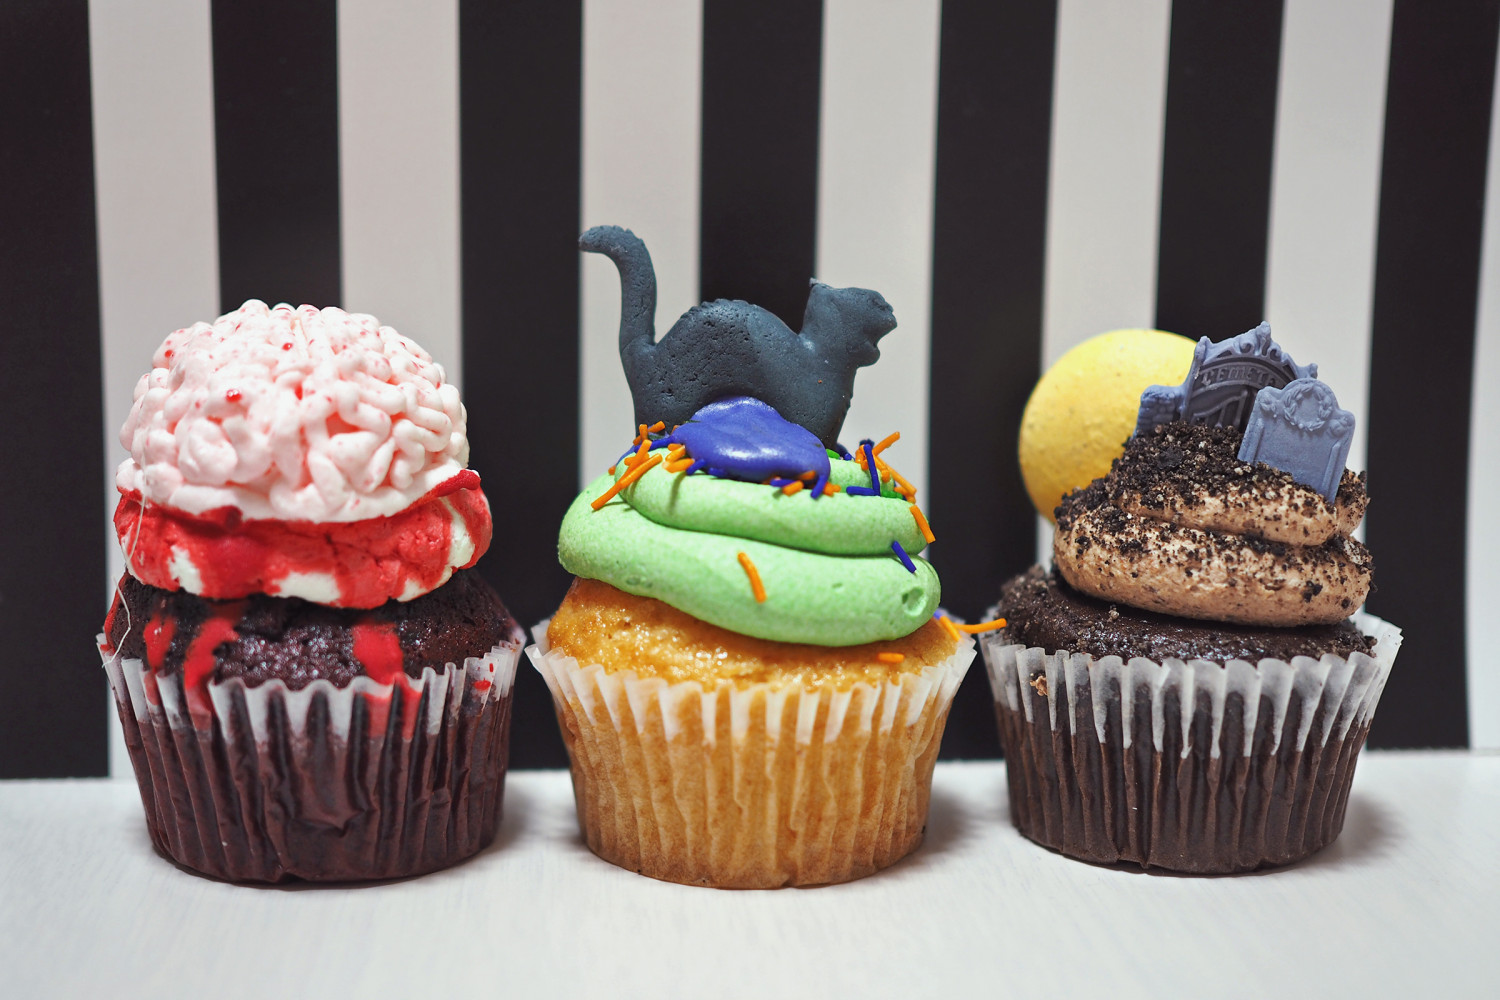 Kimo-kawaii! Get Spooked This Halloween With These Adorably Scary Sweets